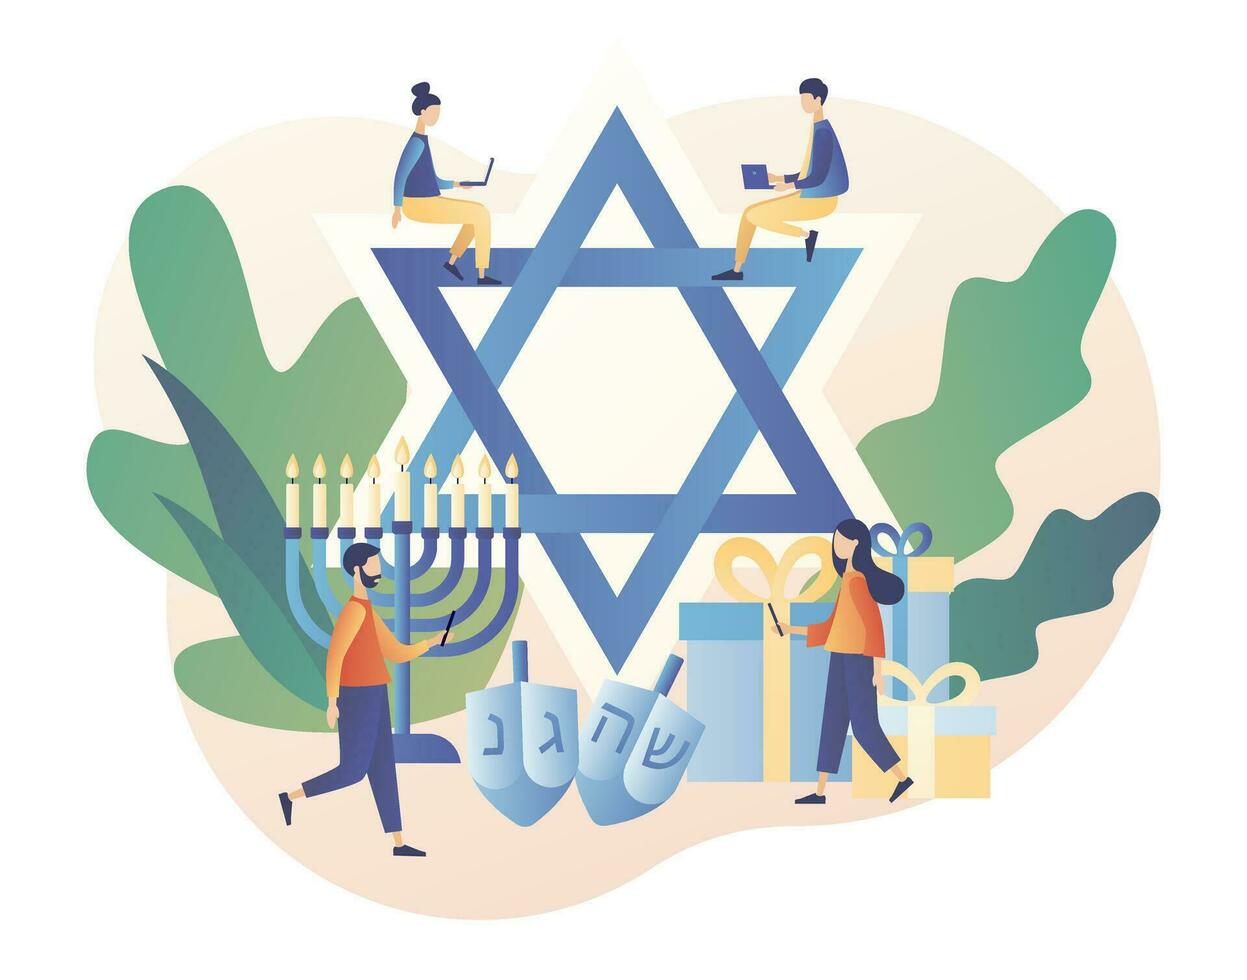 Big star David. Happy Hanukkah. Traditional jewish holiday with tiny people and symbols - menorah candles, dreidels spinning top. Modern flat cartoon style. Vector illustration on white background